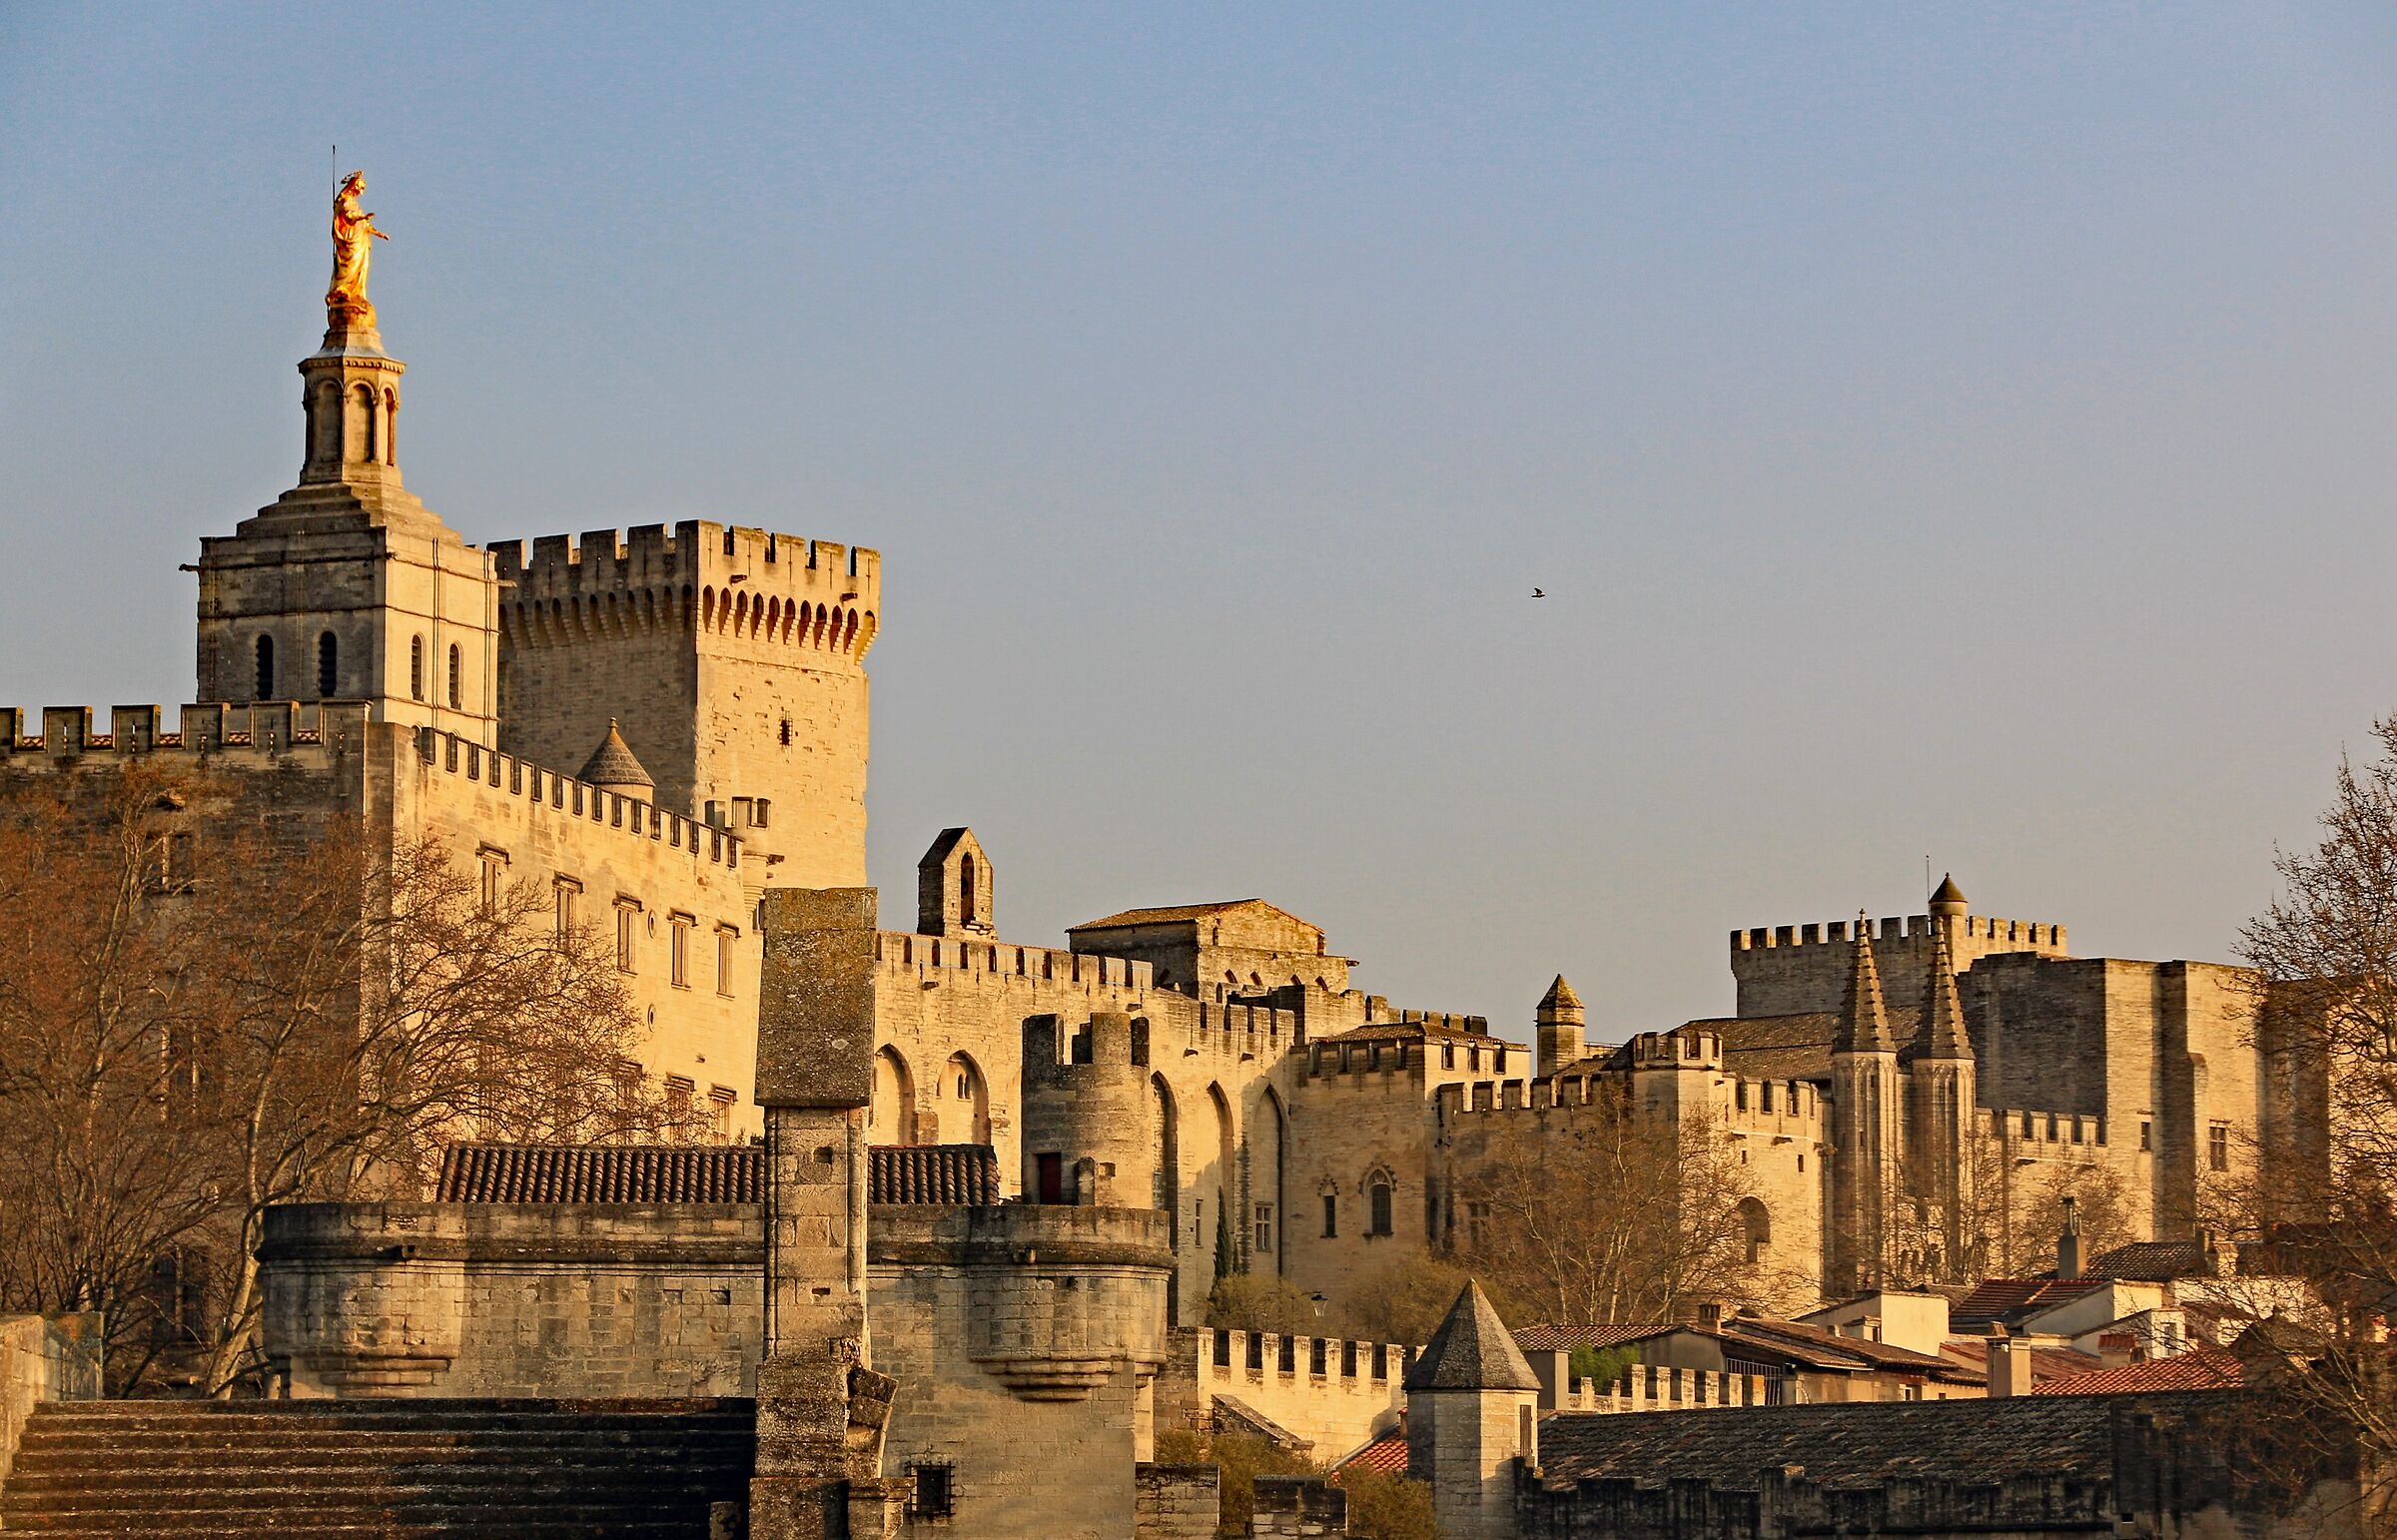 Avignon: Palace of the Popes at sunset...